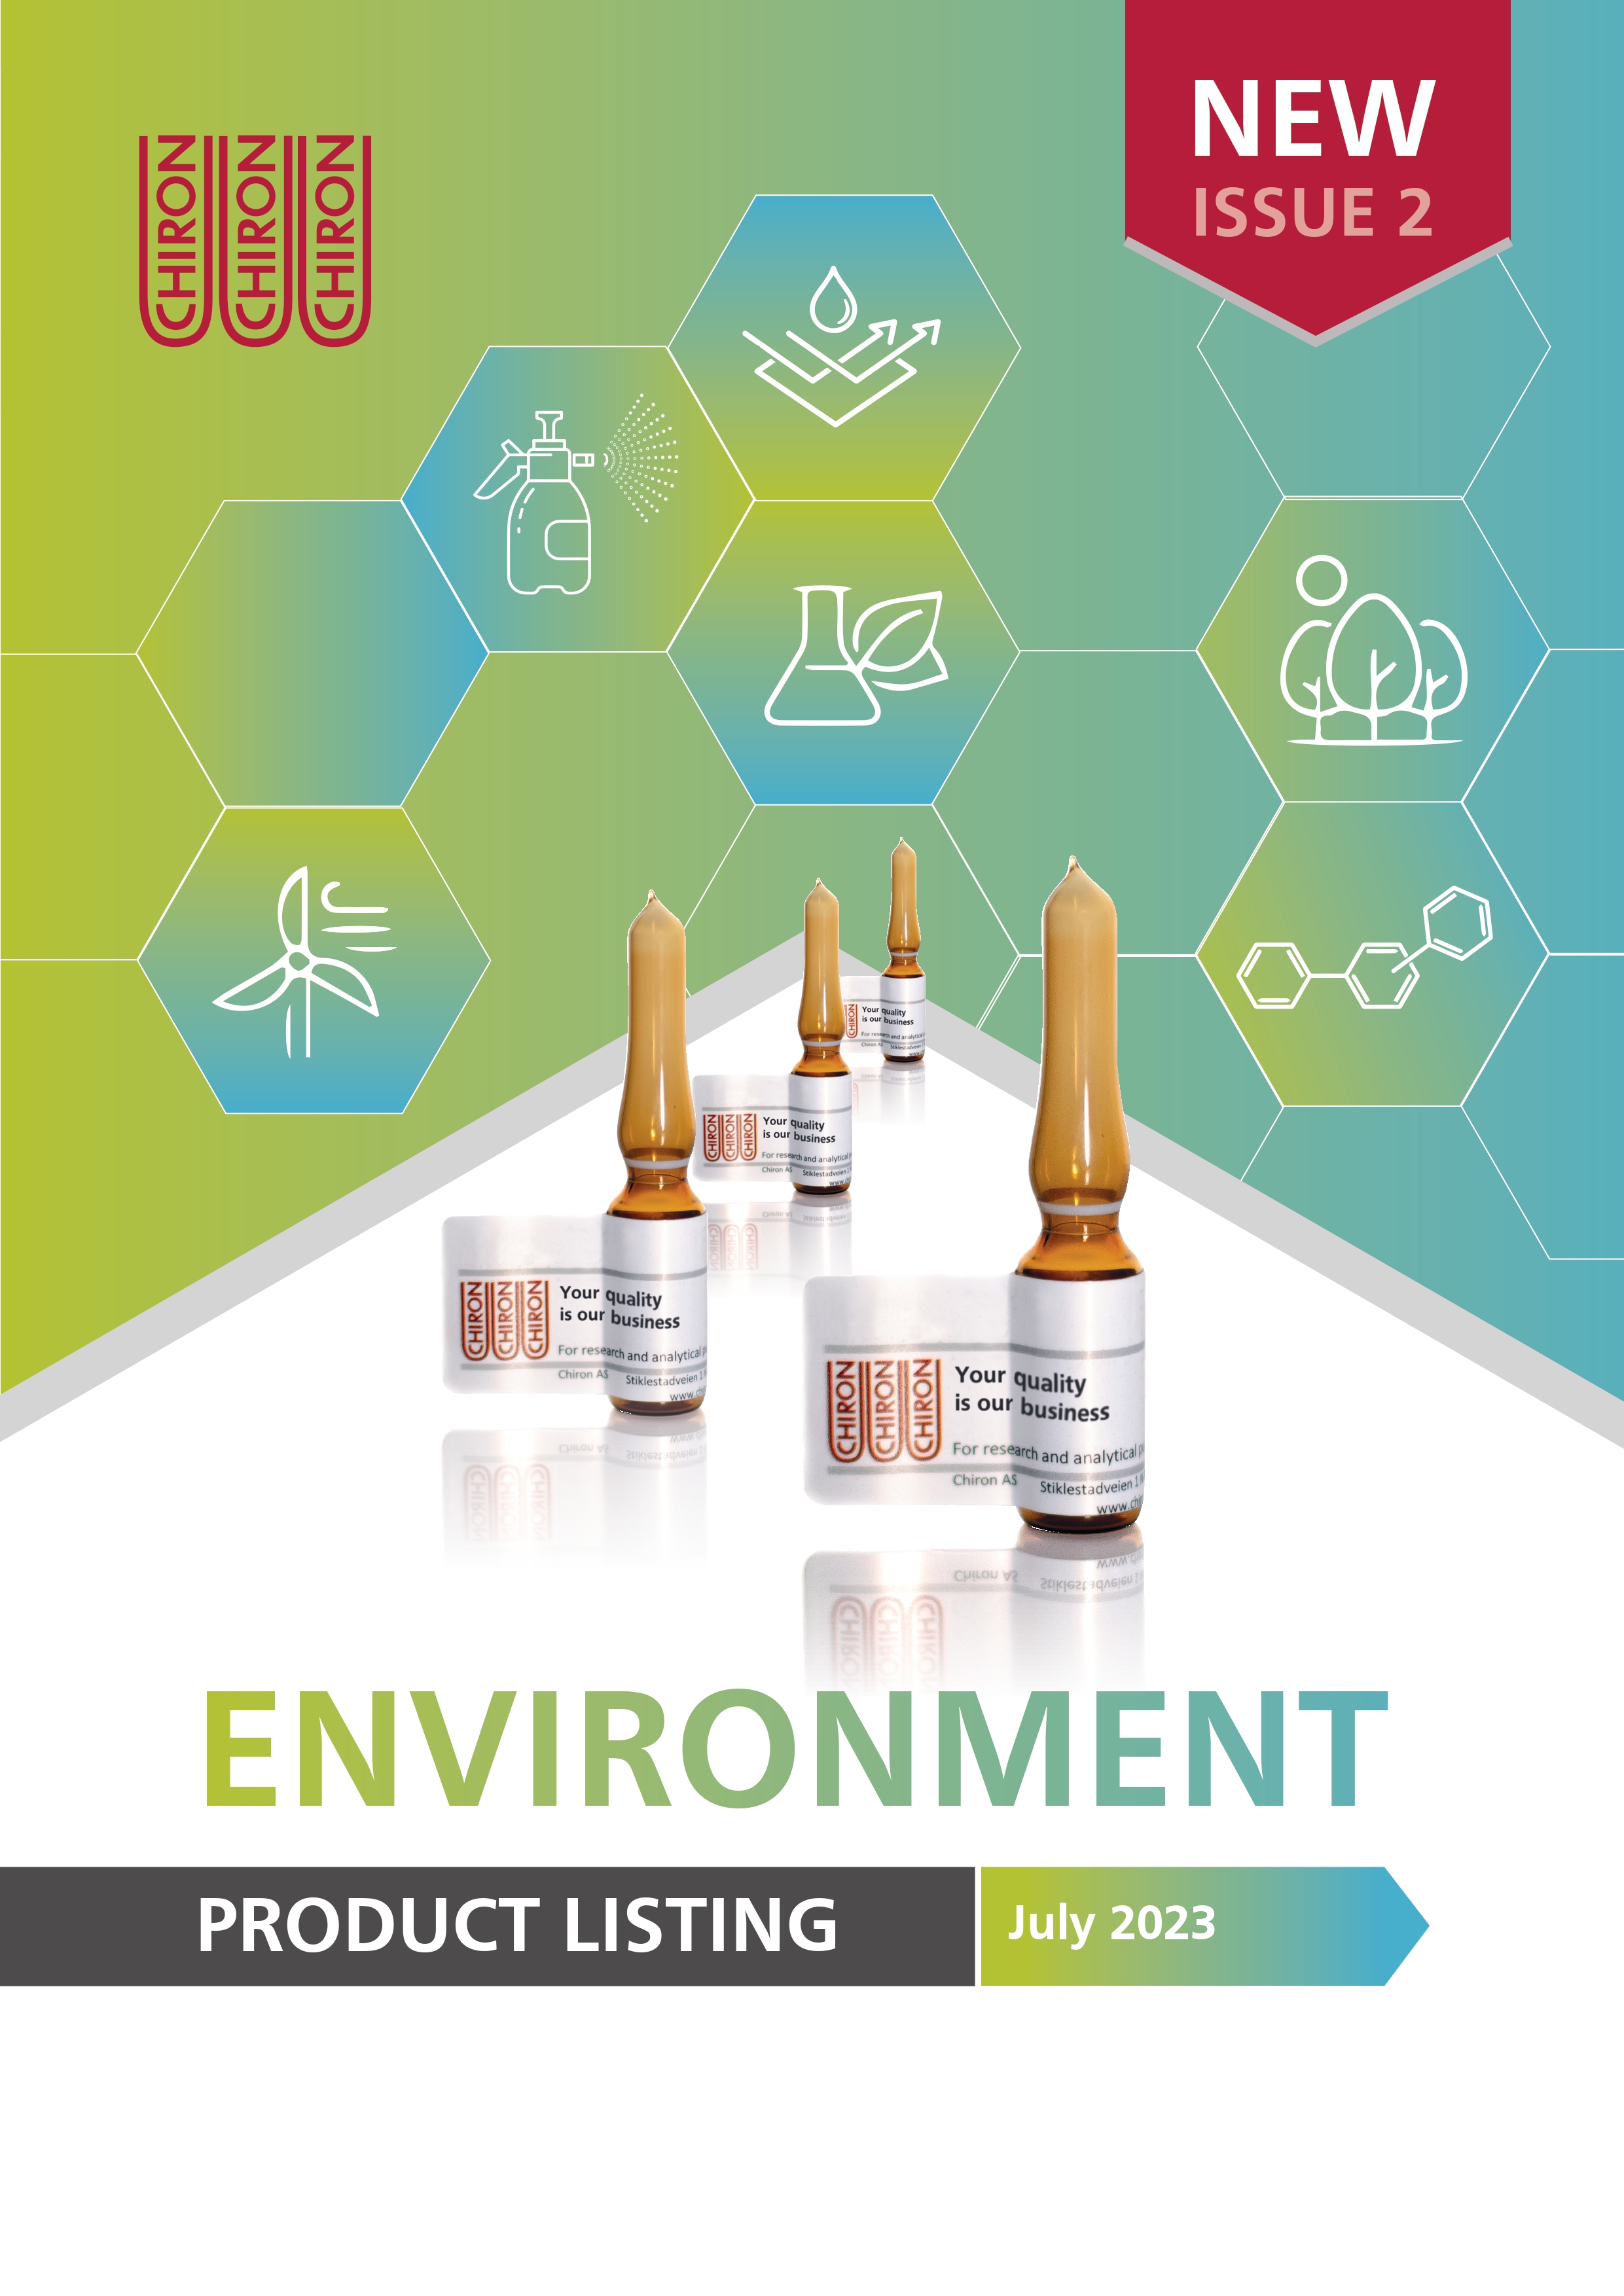 New Environmental Product Issue 2 | July 2023